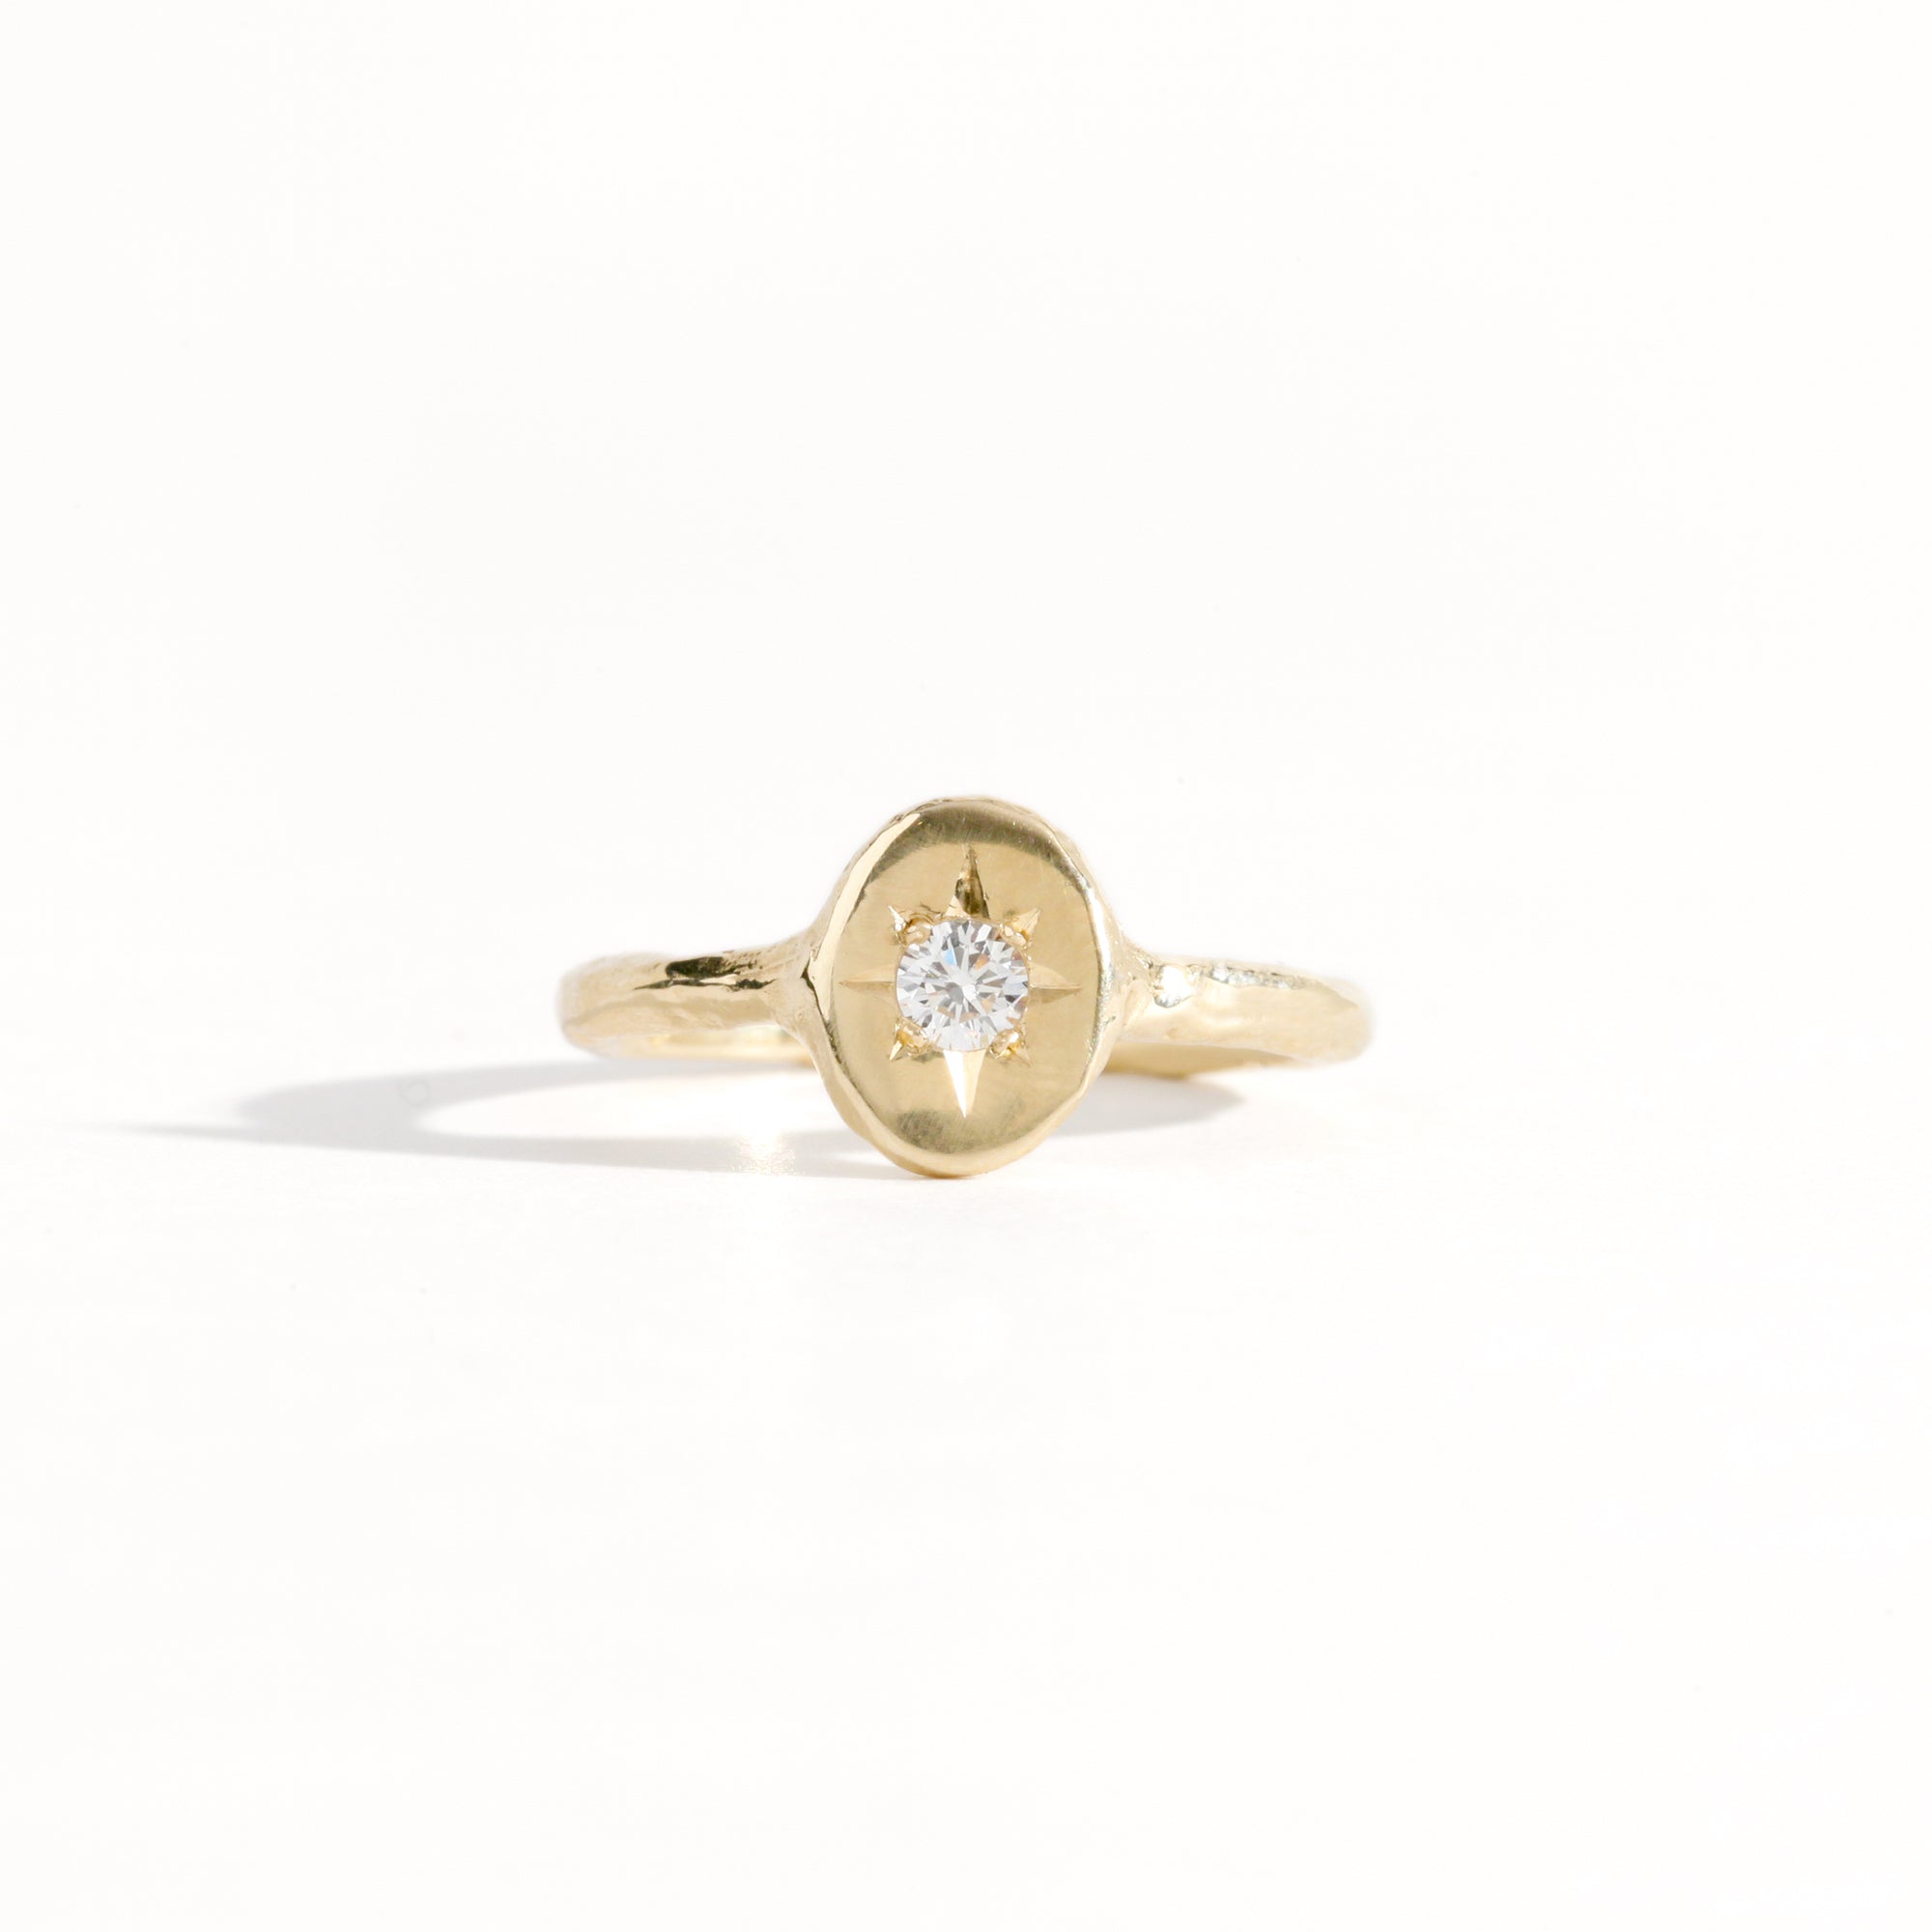 9ct yellow gold signet ring with star set diamond in centre. Bespoke and handmade in Melbourne by Black Finch Jewellery